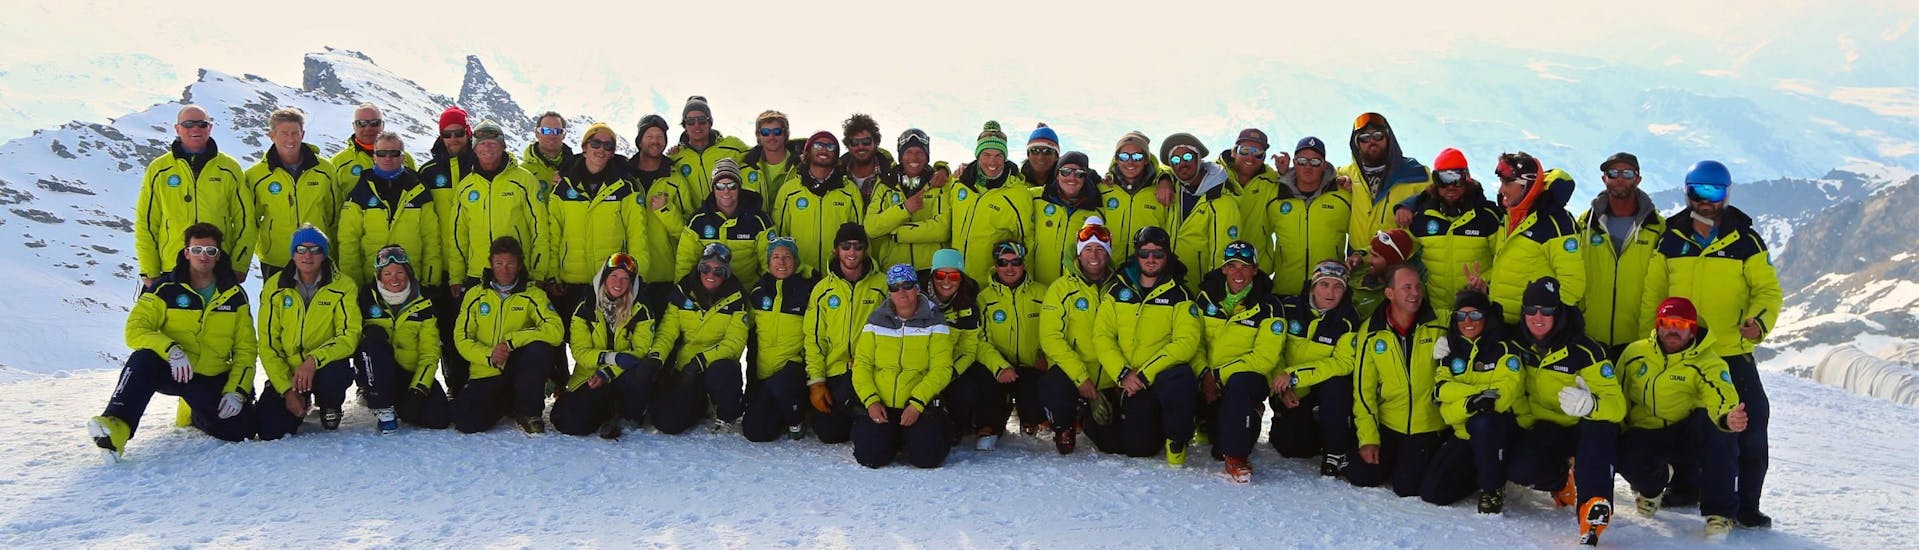 A group of skiers and their ski instructor from Prosneige Méribel are posing together in the snow while enjoying one of their ski lessons.